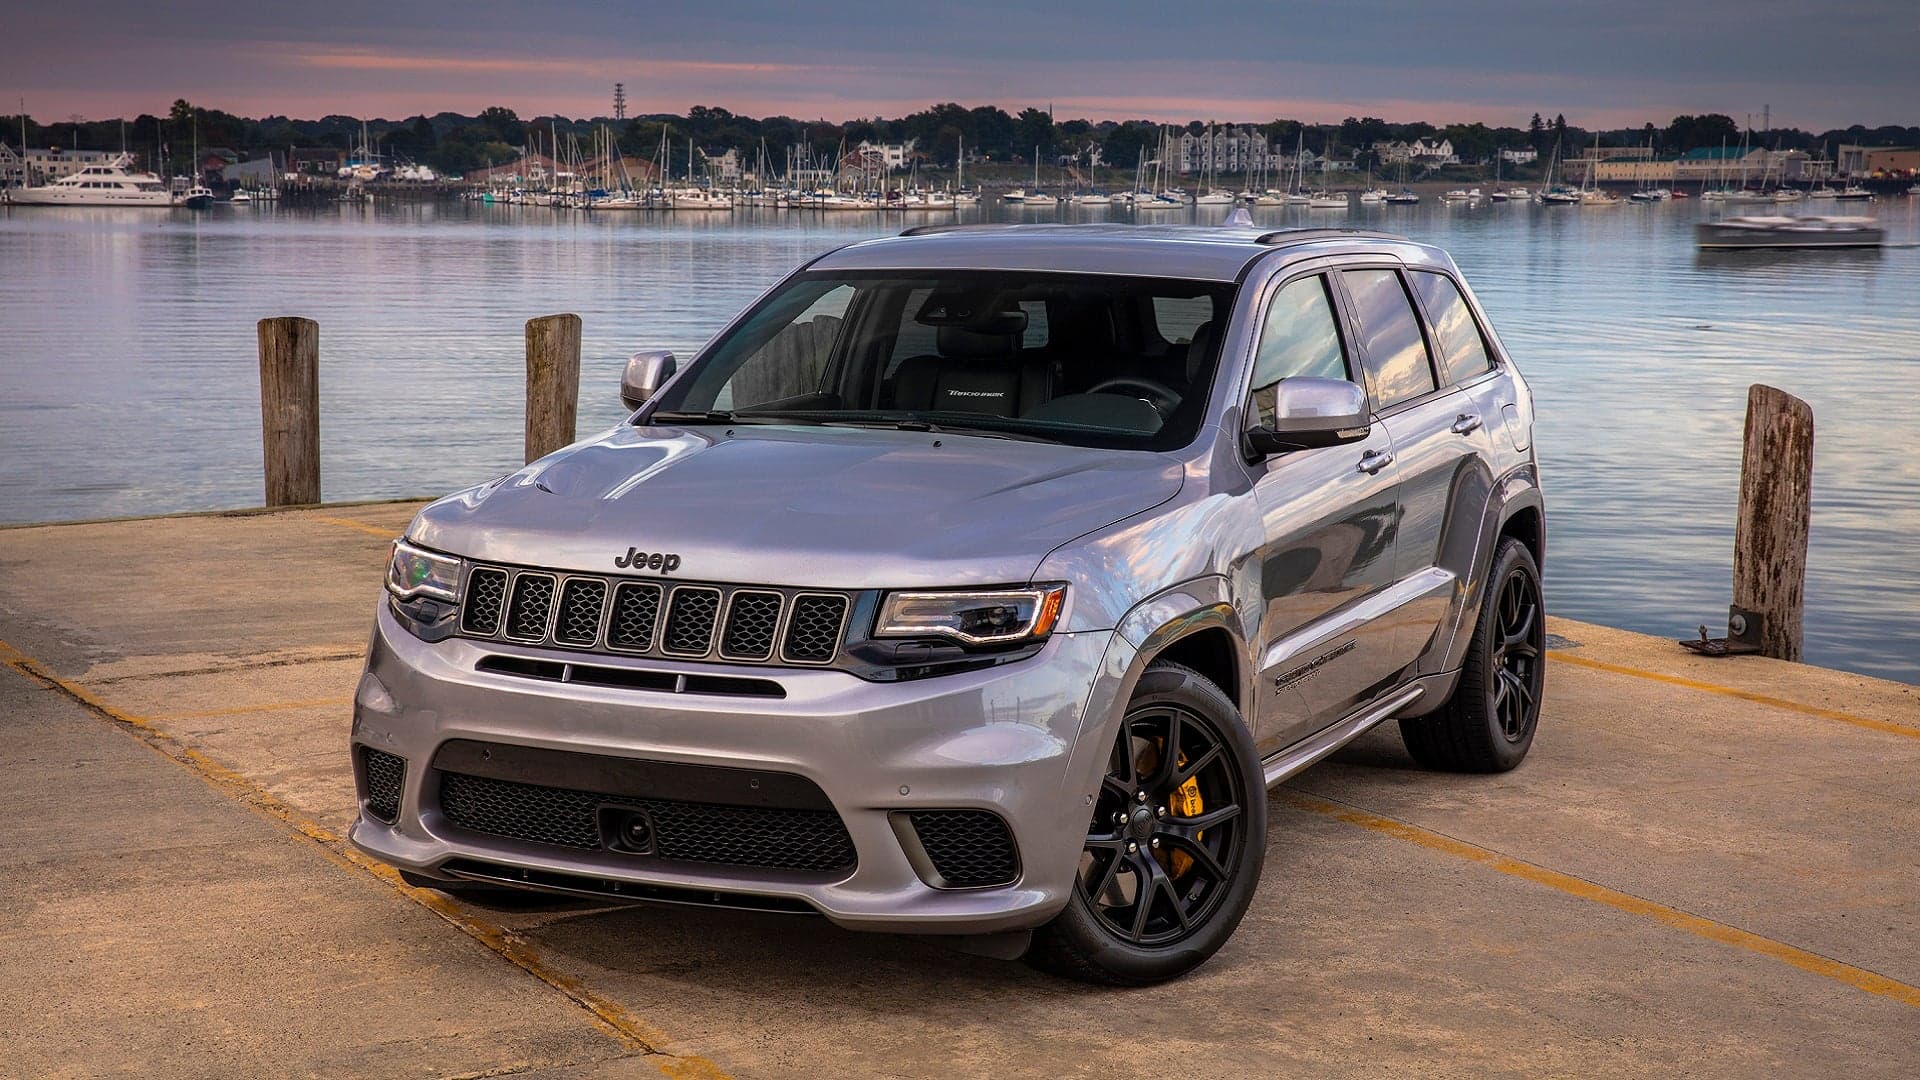 Could There Be a Jeep Grand Cherokee Trackhawk ‘Redeye’ in the Works?